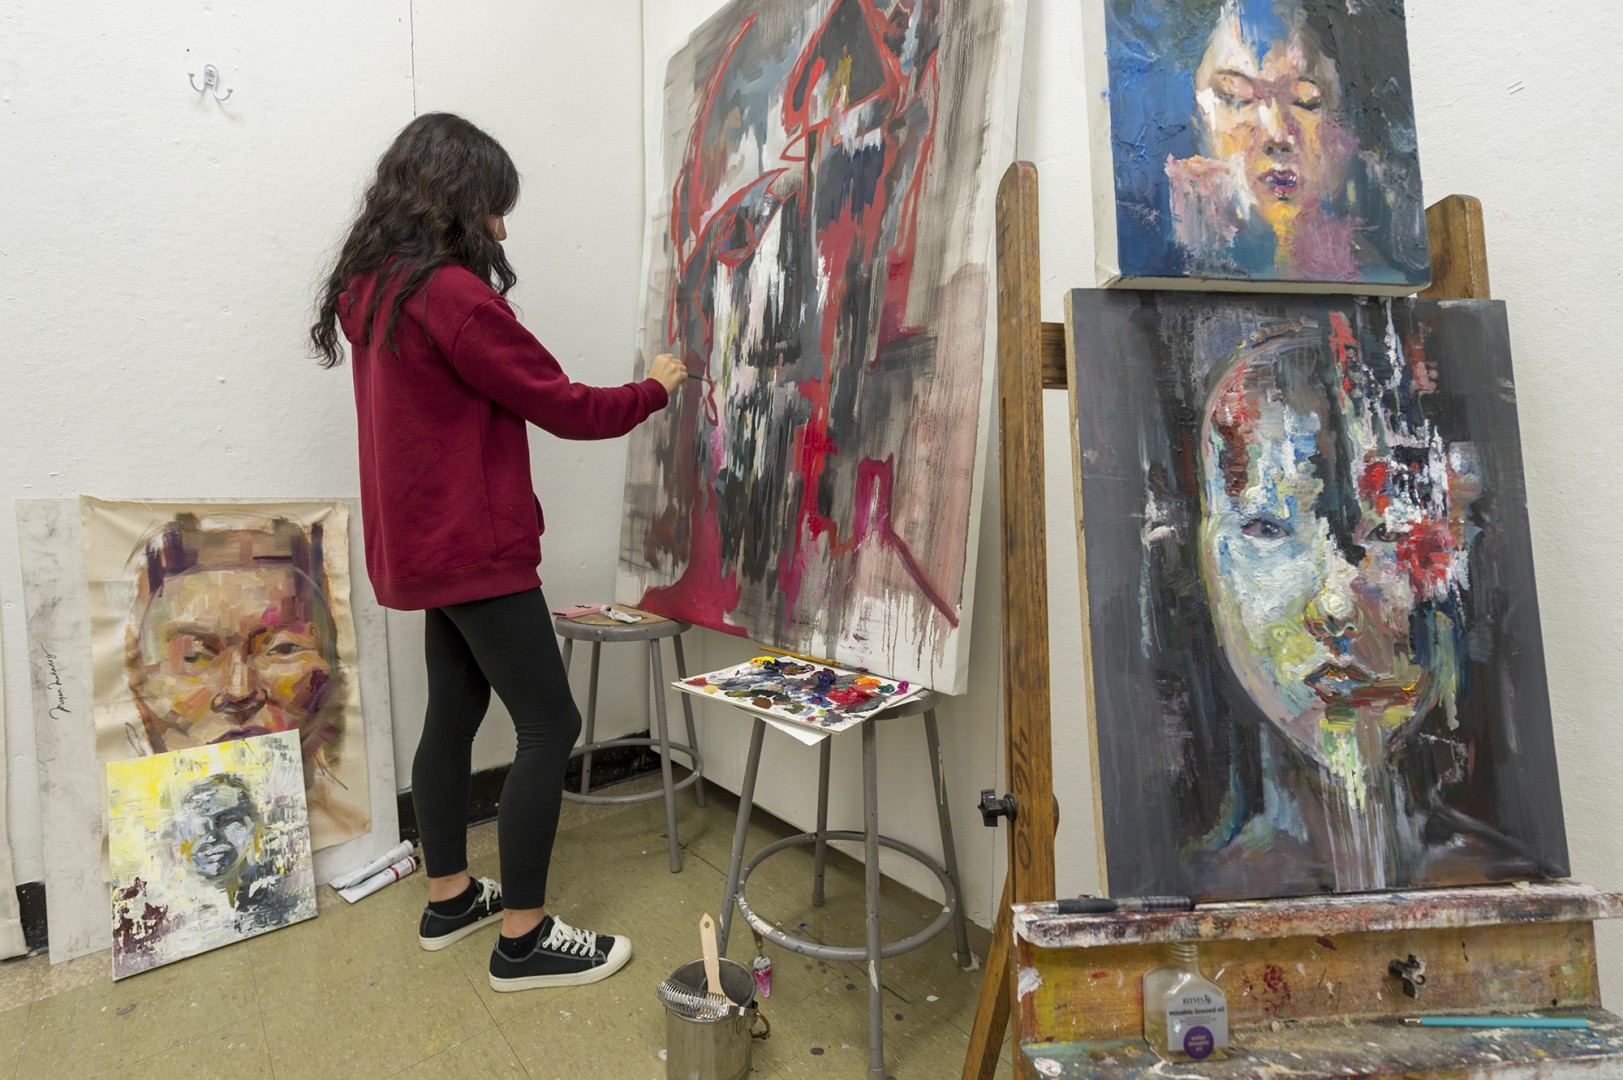 A student paints in a studio.